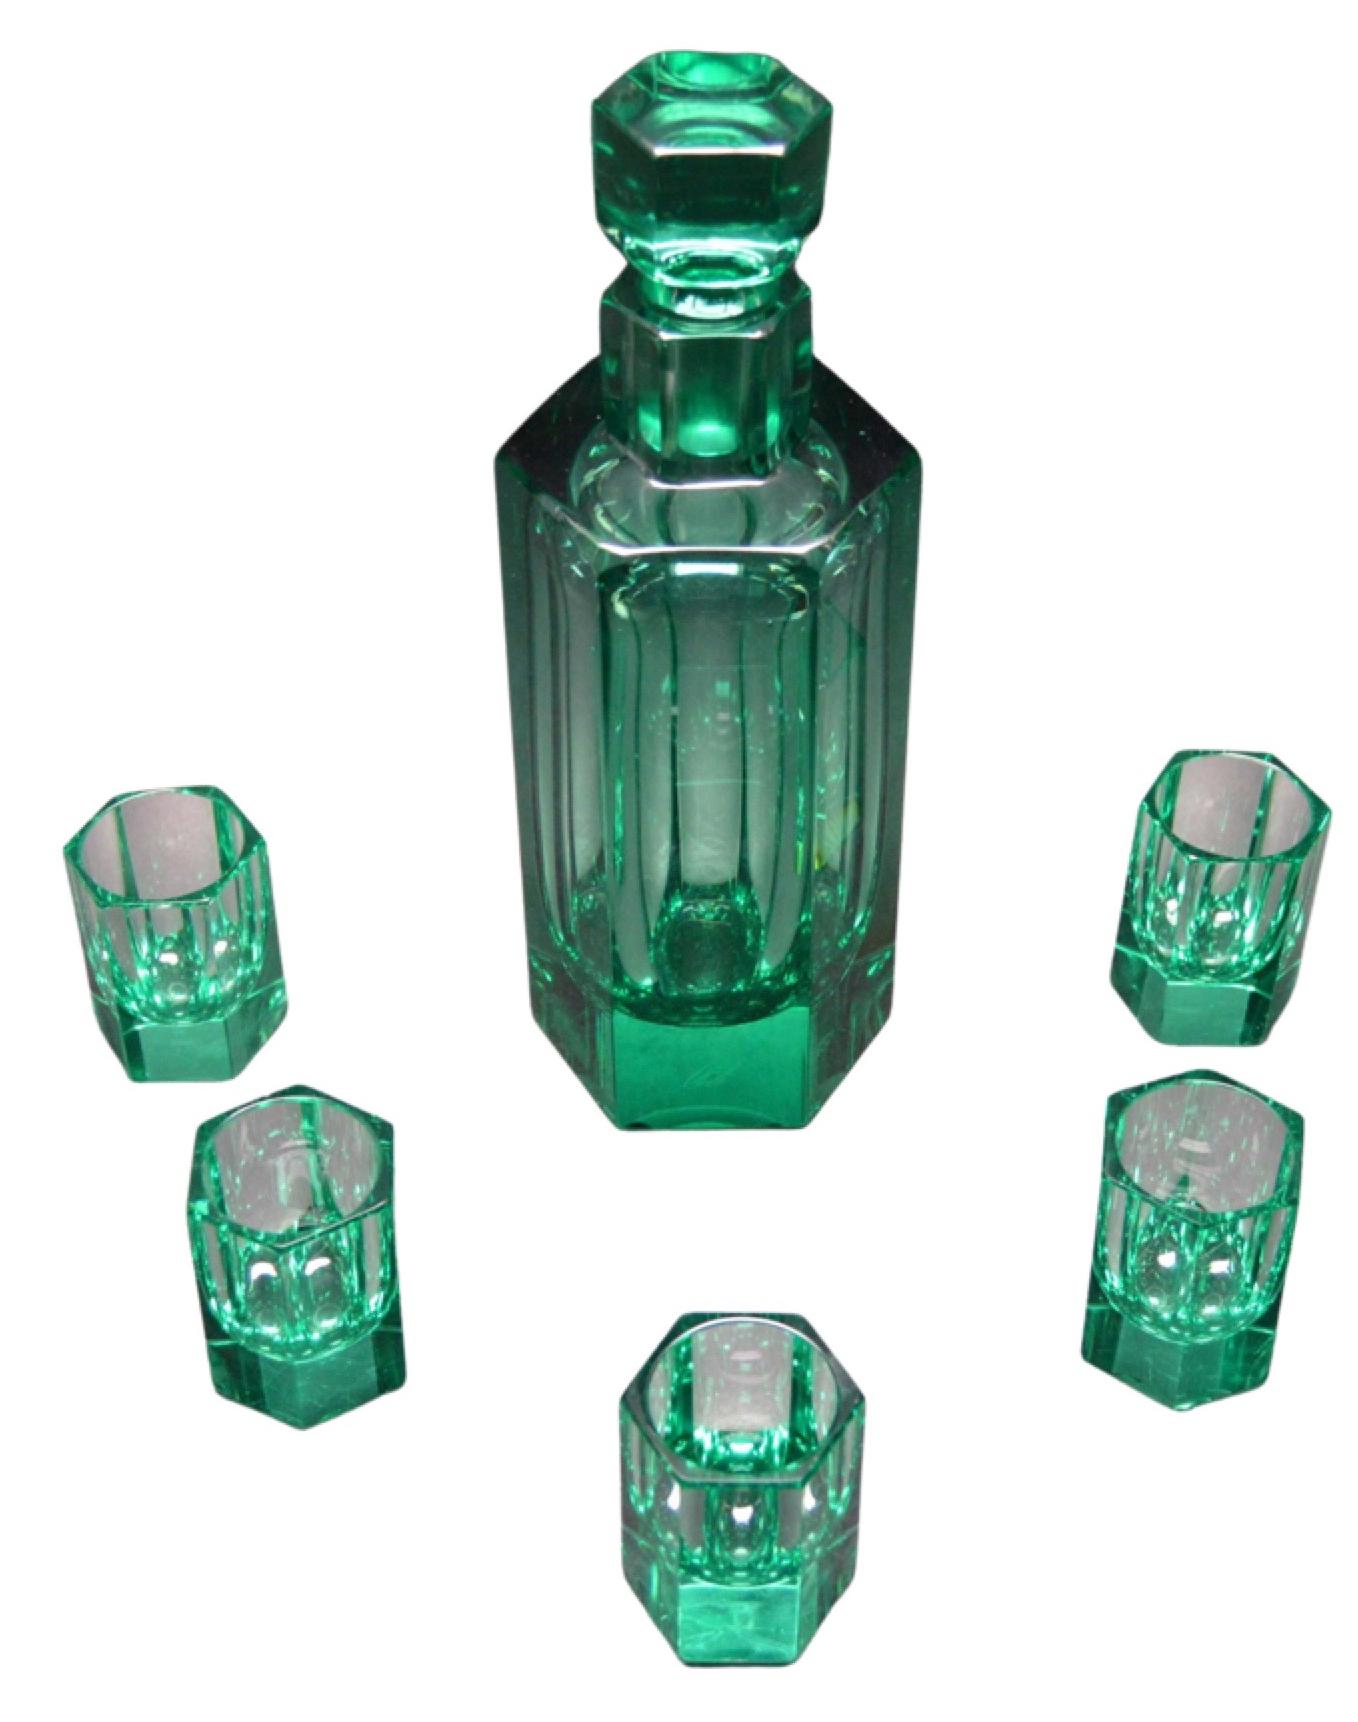 Moser glass Art Deco Czech rare green decanter set. The decanter is marked Moser Carlsbad. The color is incredible, no one can make colors like Moser, welcome to the emerald city, also the craftsmanship and weight of the highest quality. This is a